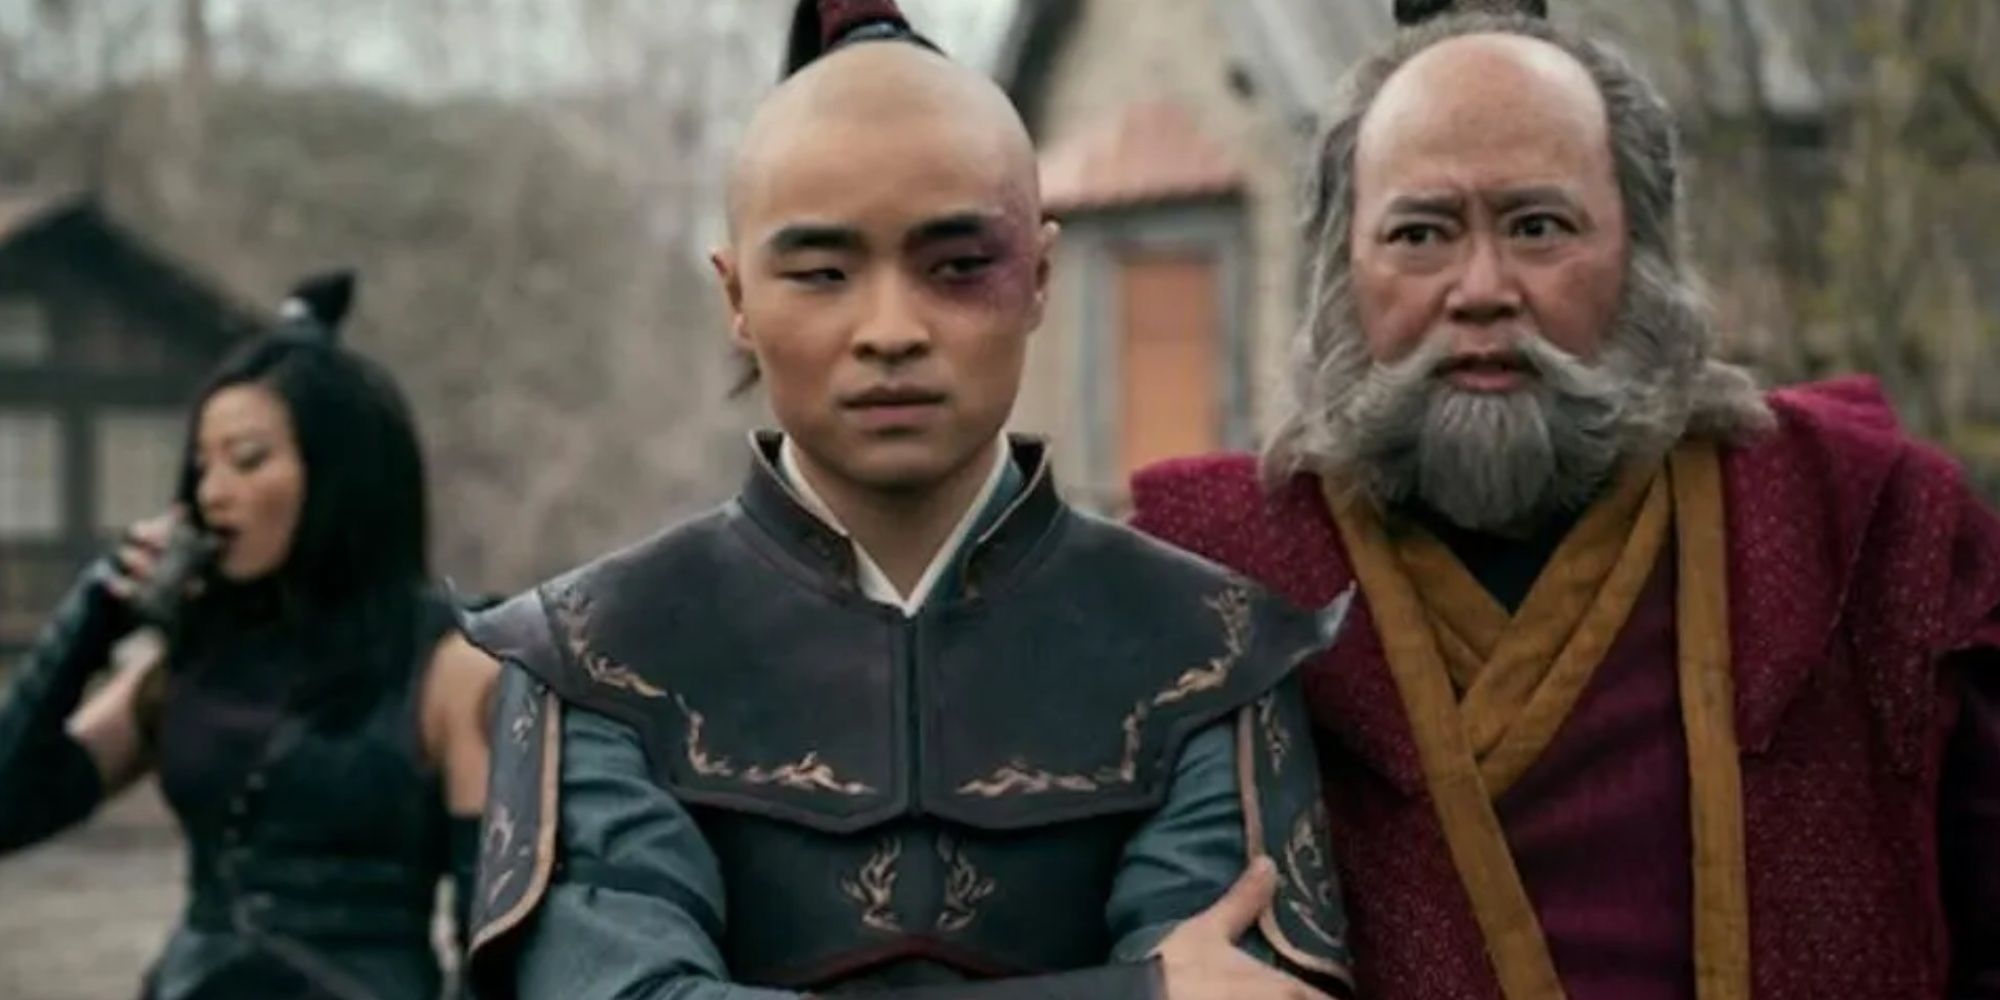 iroh and zuko with jade in the background live action netflix the last airbender